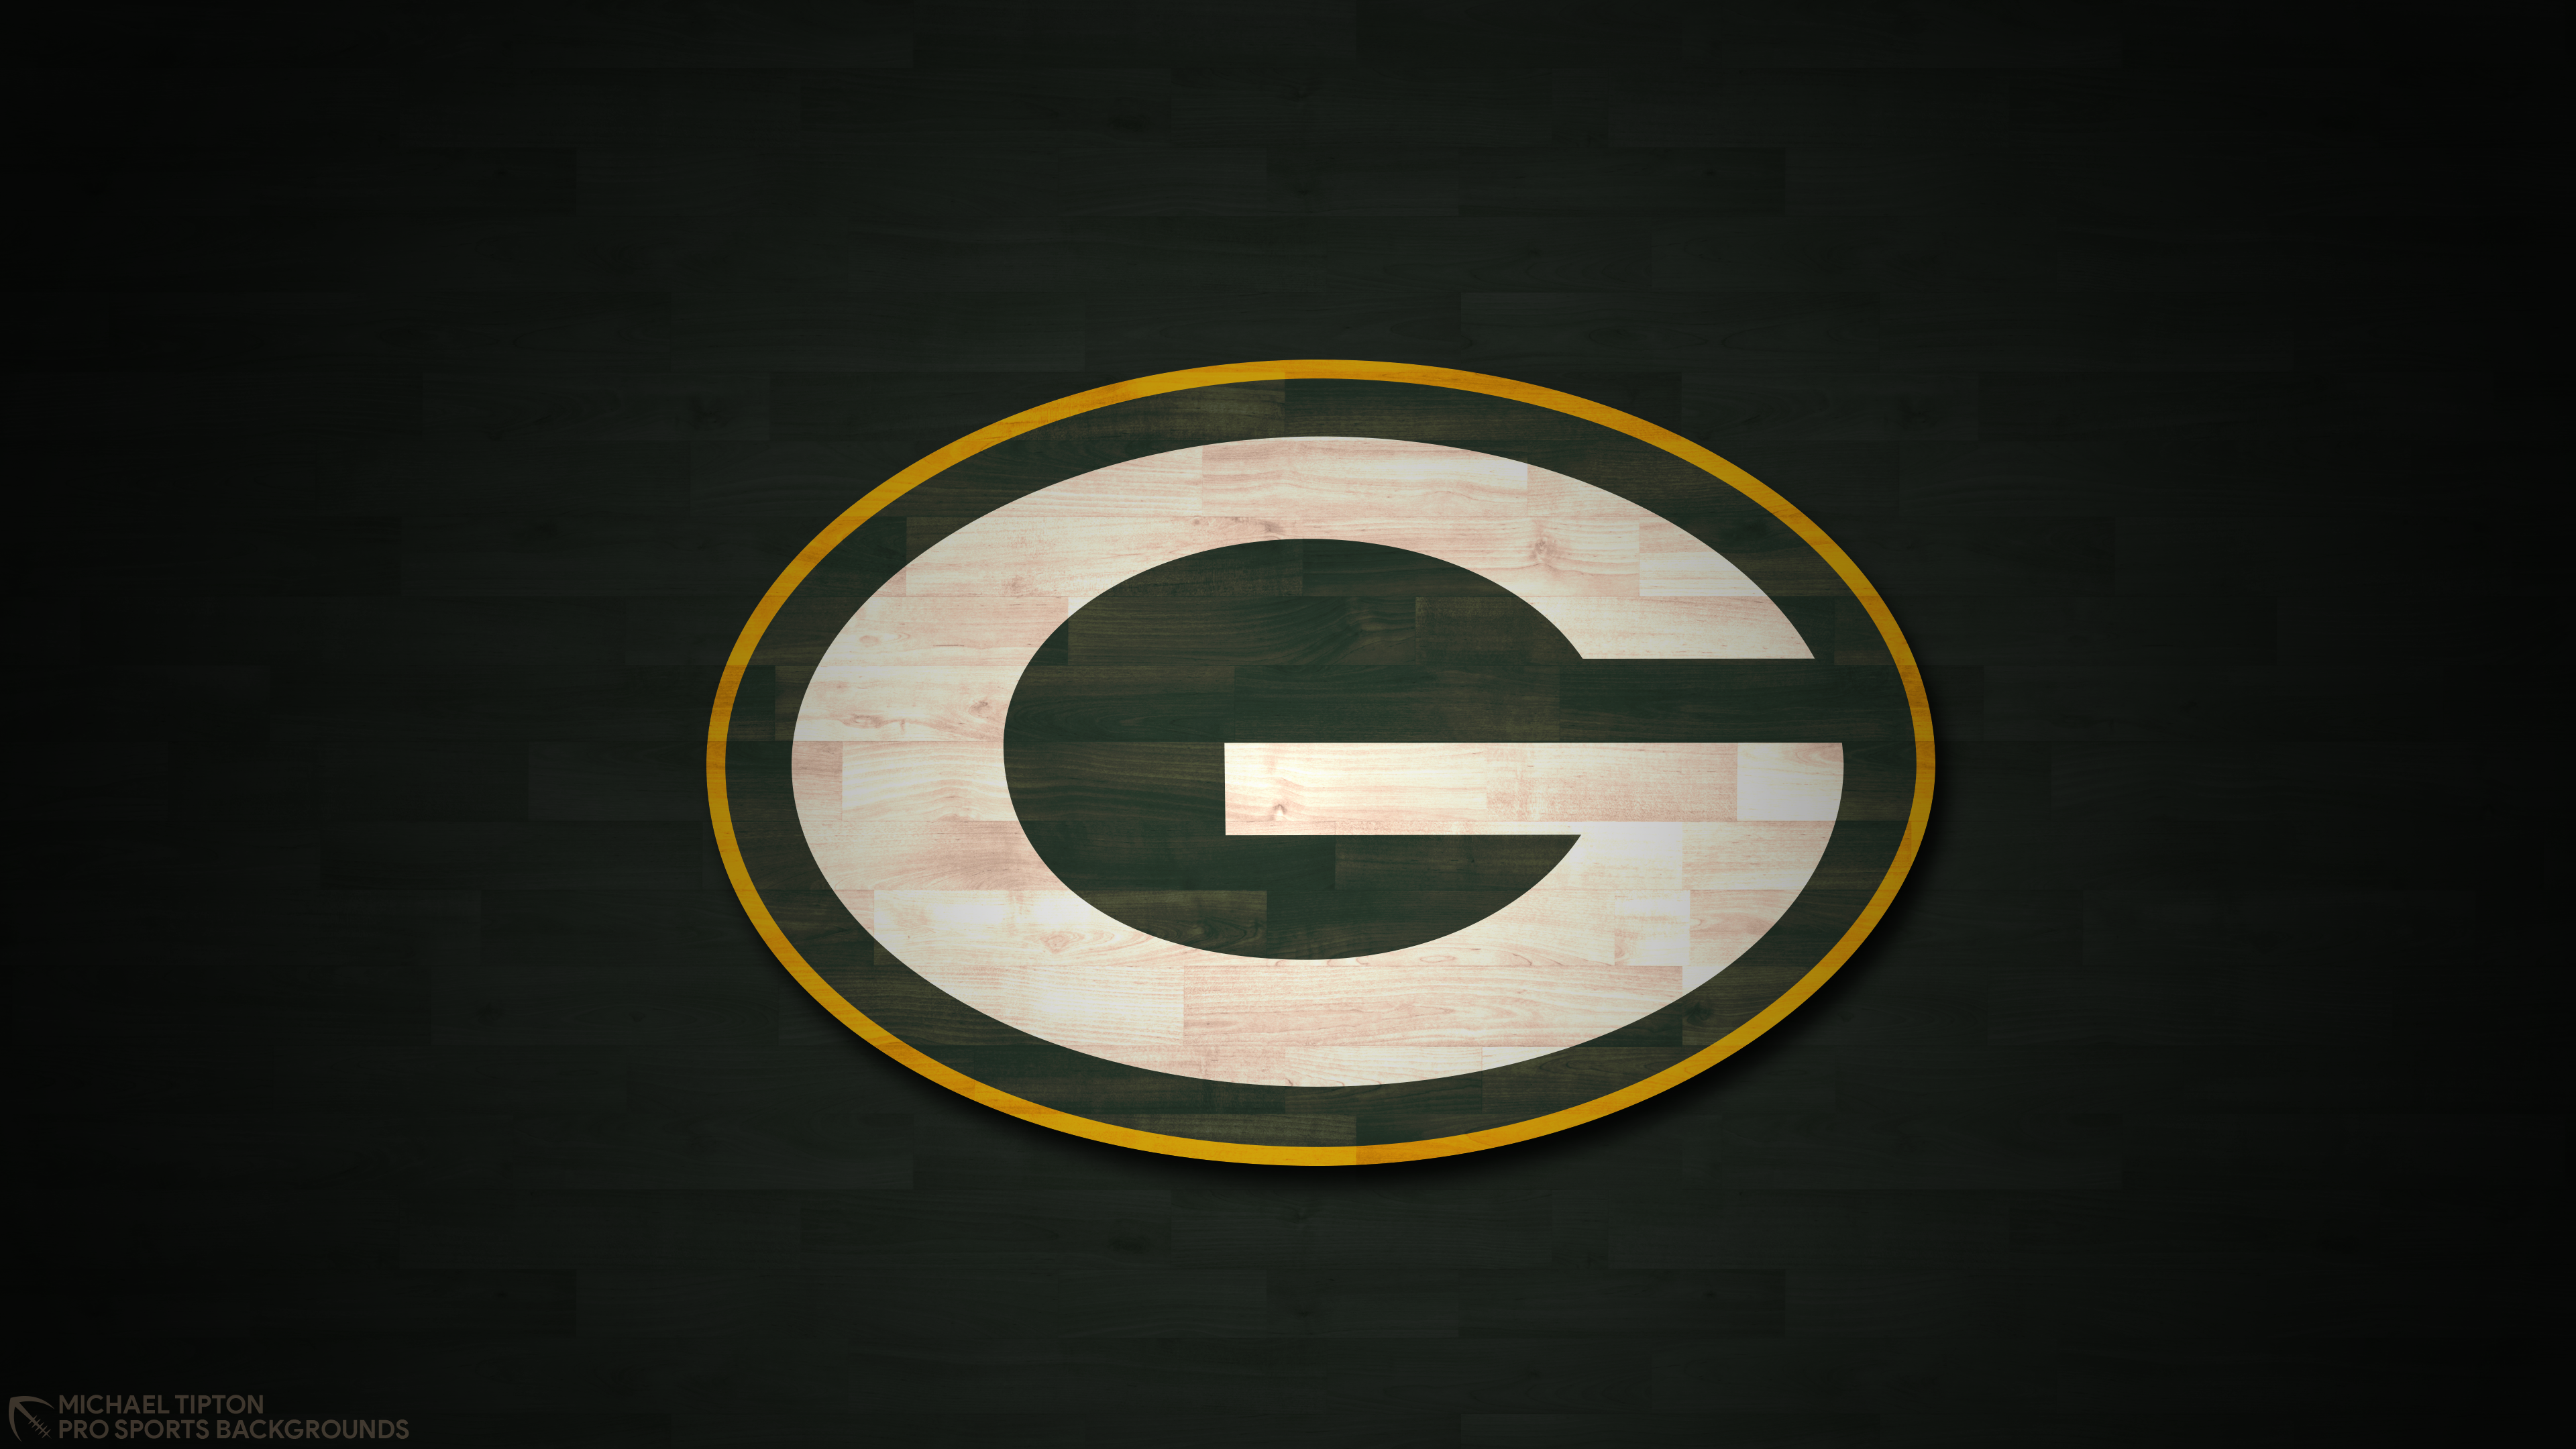 Sports Green Bay Packers HD Wallpaper | Background Image